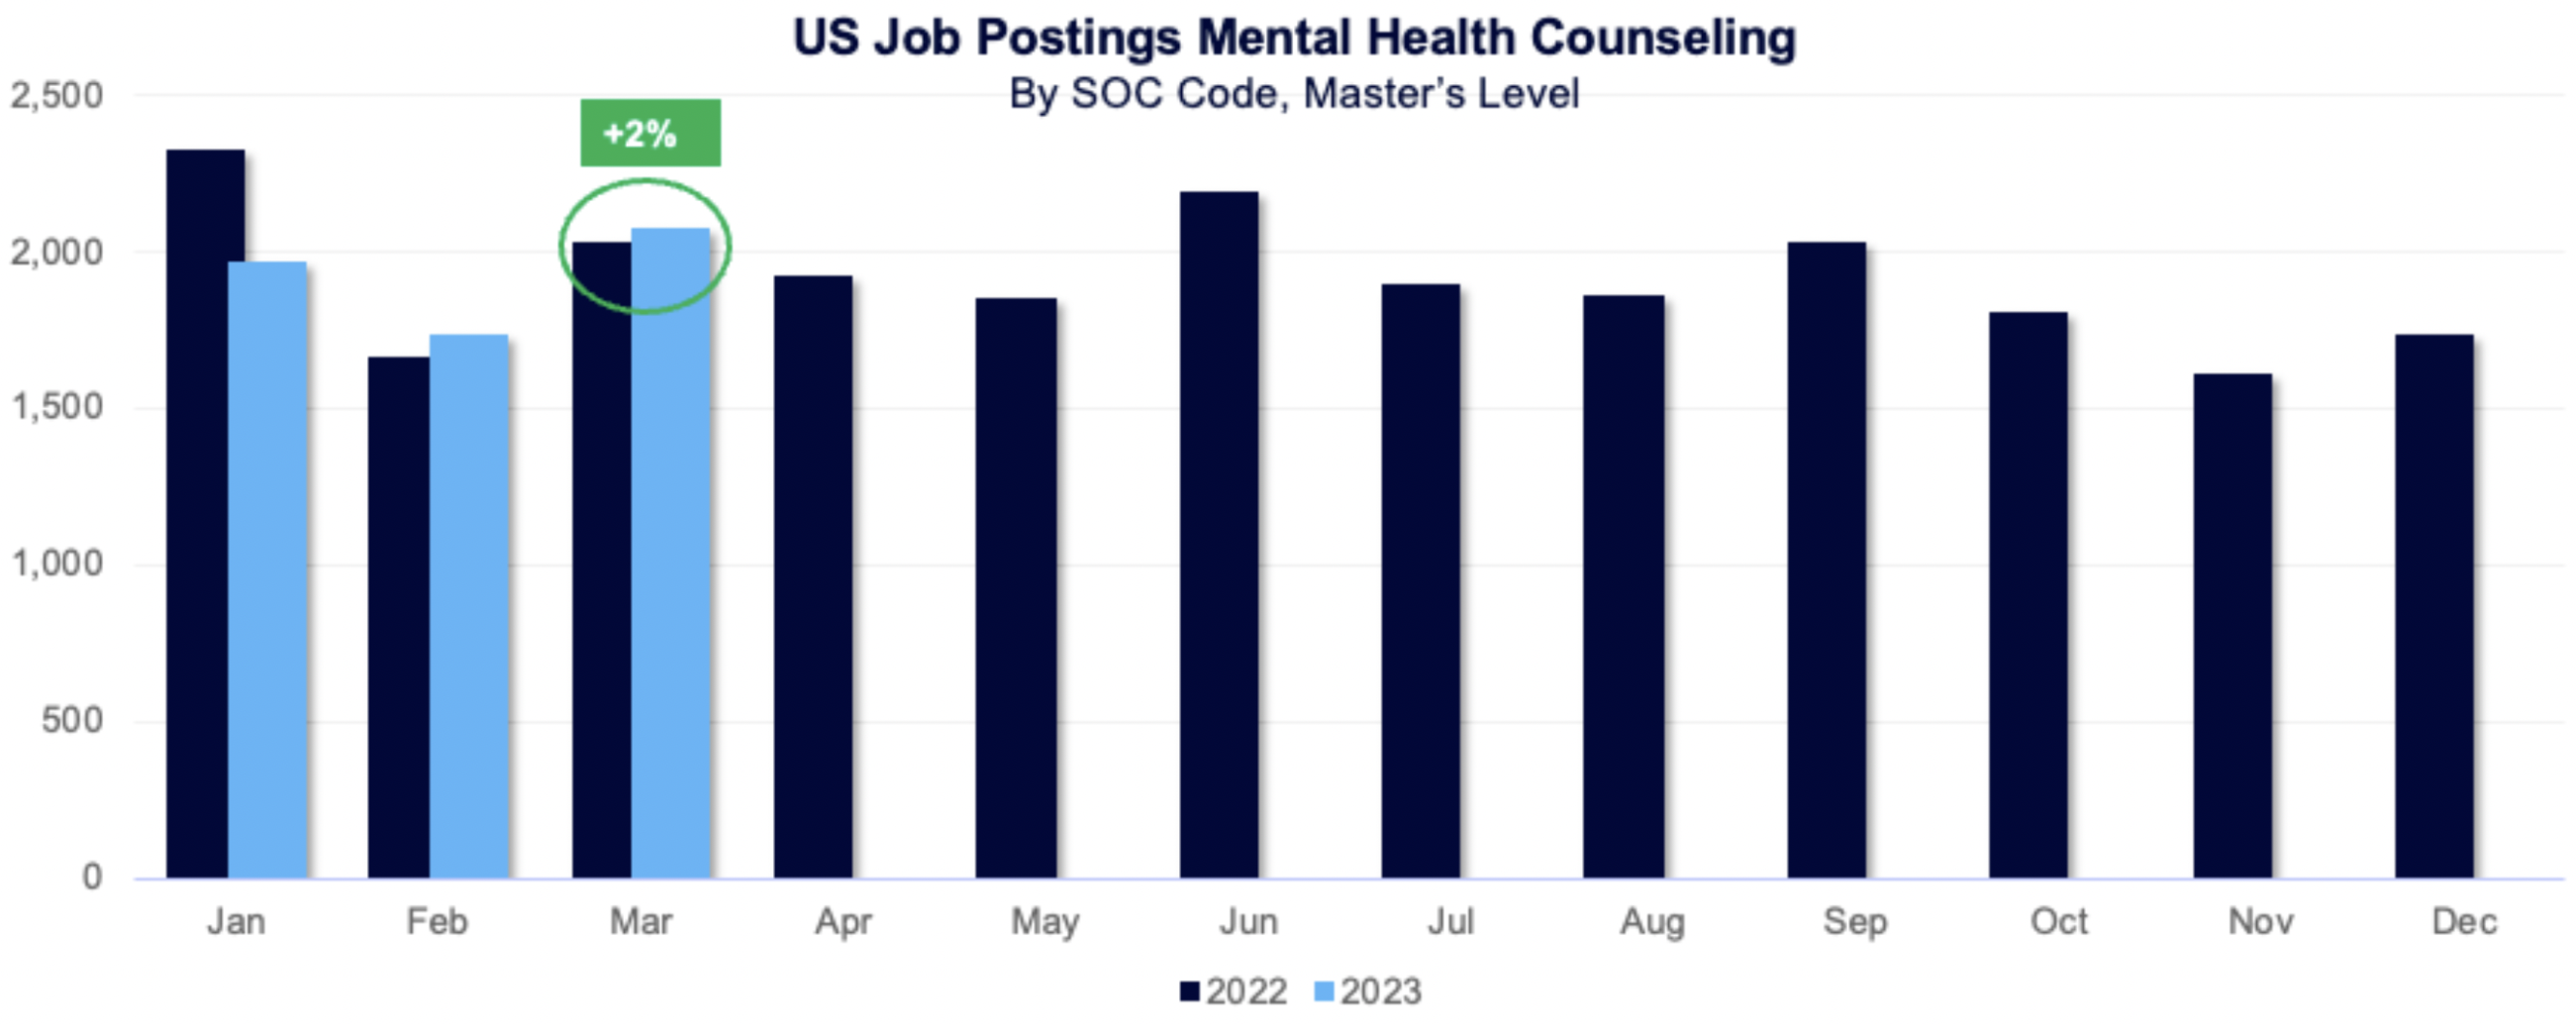 US Job Postings Mental Health Counseling: By SOC Code, Master's Level